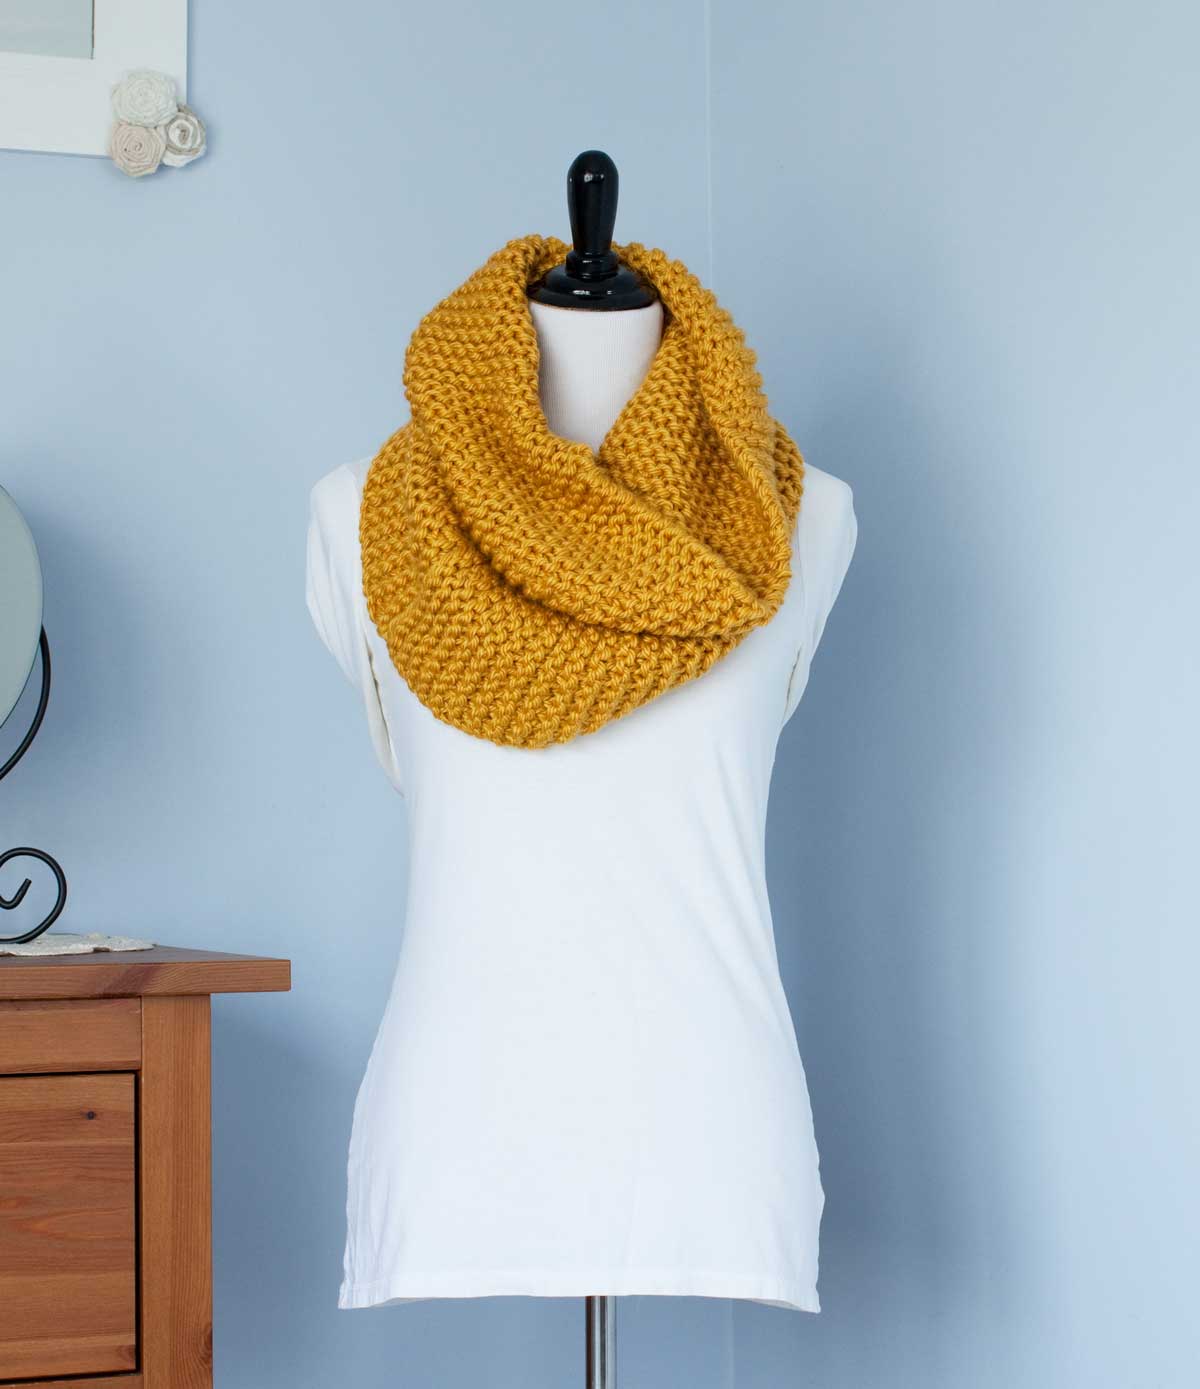 Mustard yellow scarf wrapped around a a dress-makers dummy.